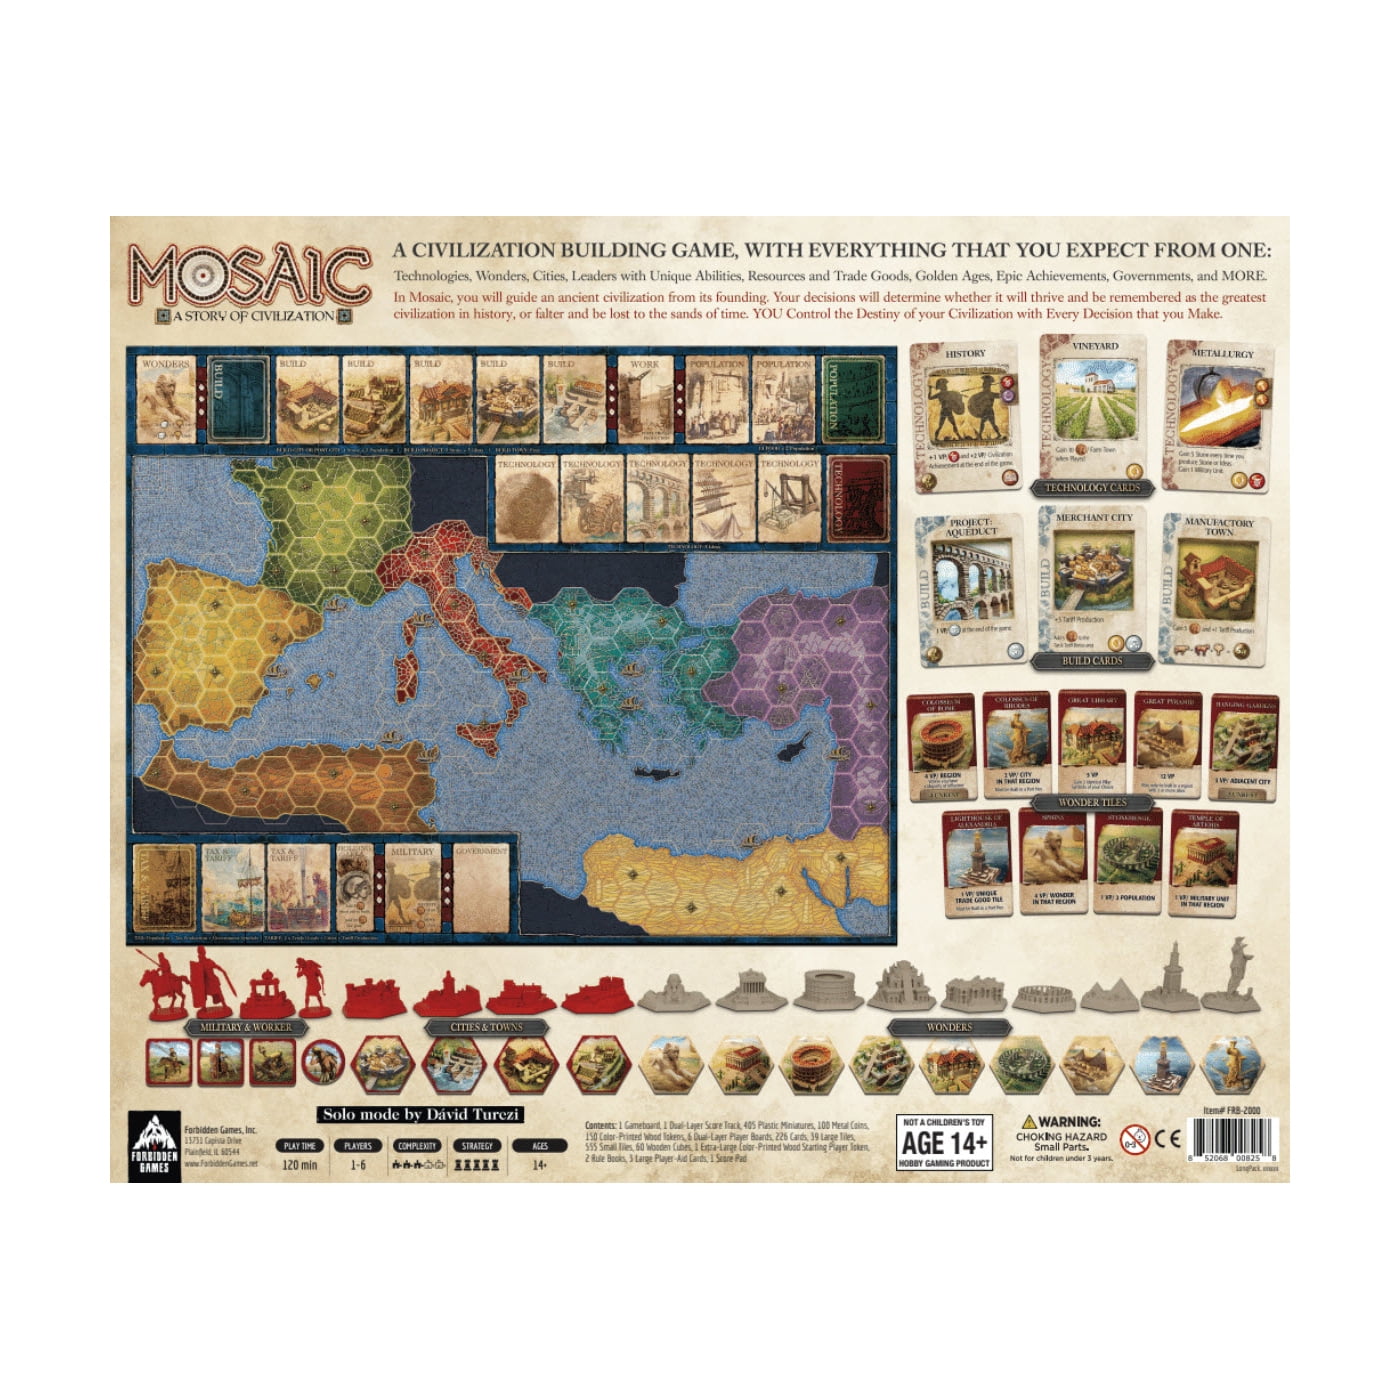  Mosaic: A Story of Civilization - Strategy Board Game for  Adults and Family, Fast, Fun, Action-Selection and Area Control Game, 2-6  Players, Ages 14 and Up